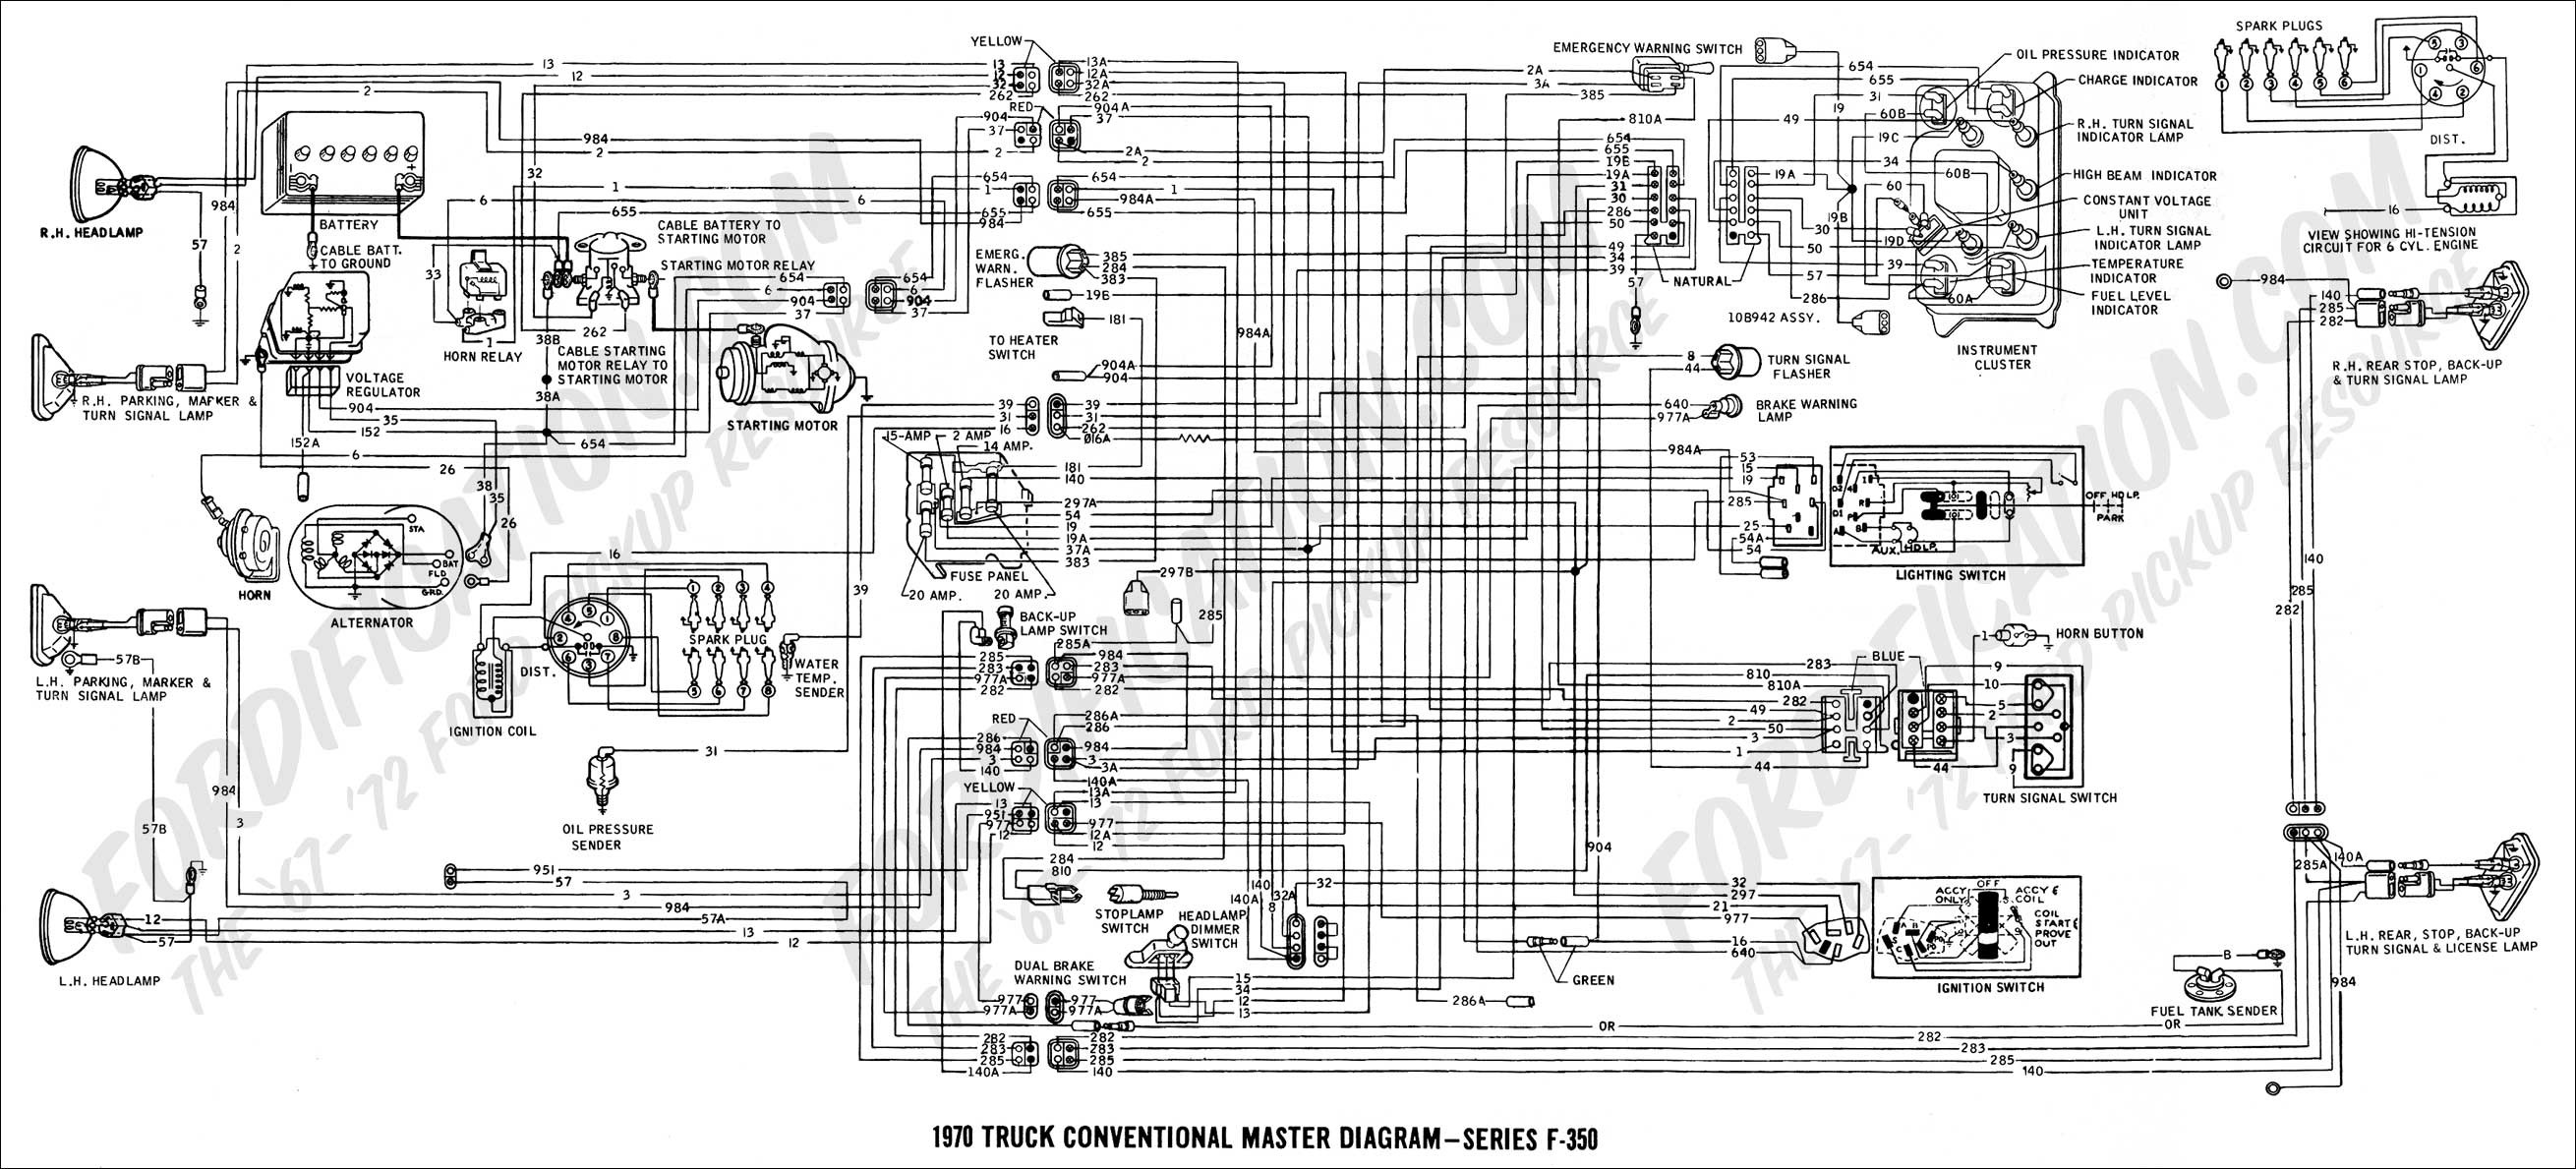 2002 ford Mustang Engine Diagram Diagram as Well ford F 350 Wiring Diagram In Addition ford Headlight Of 2002 ford Mustang Engine Diagram